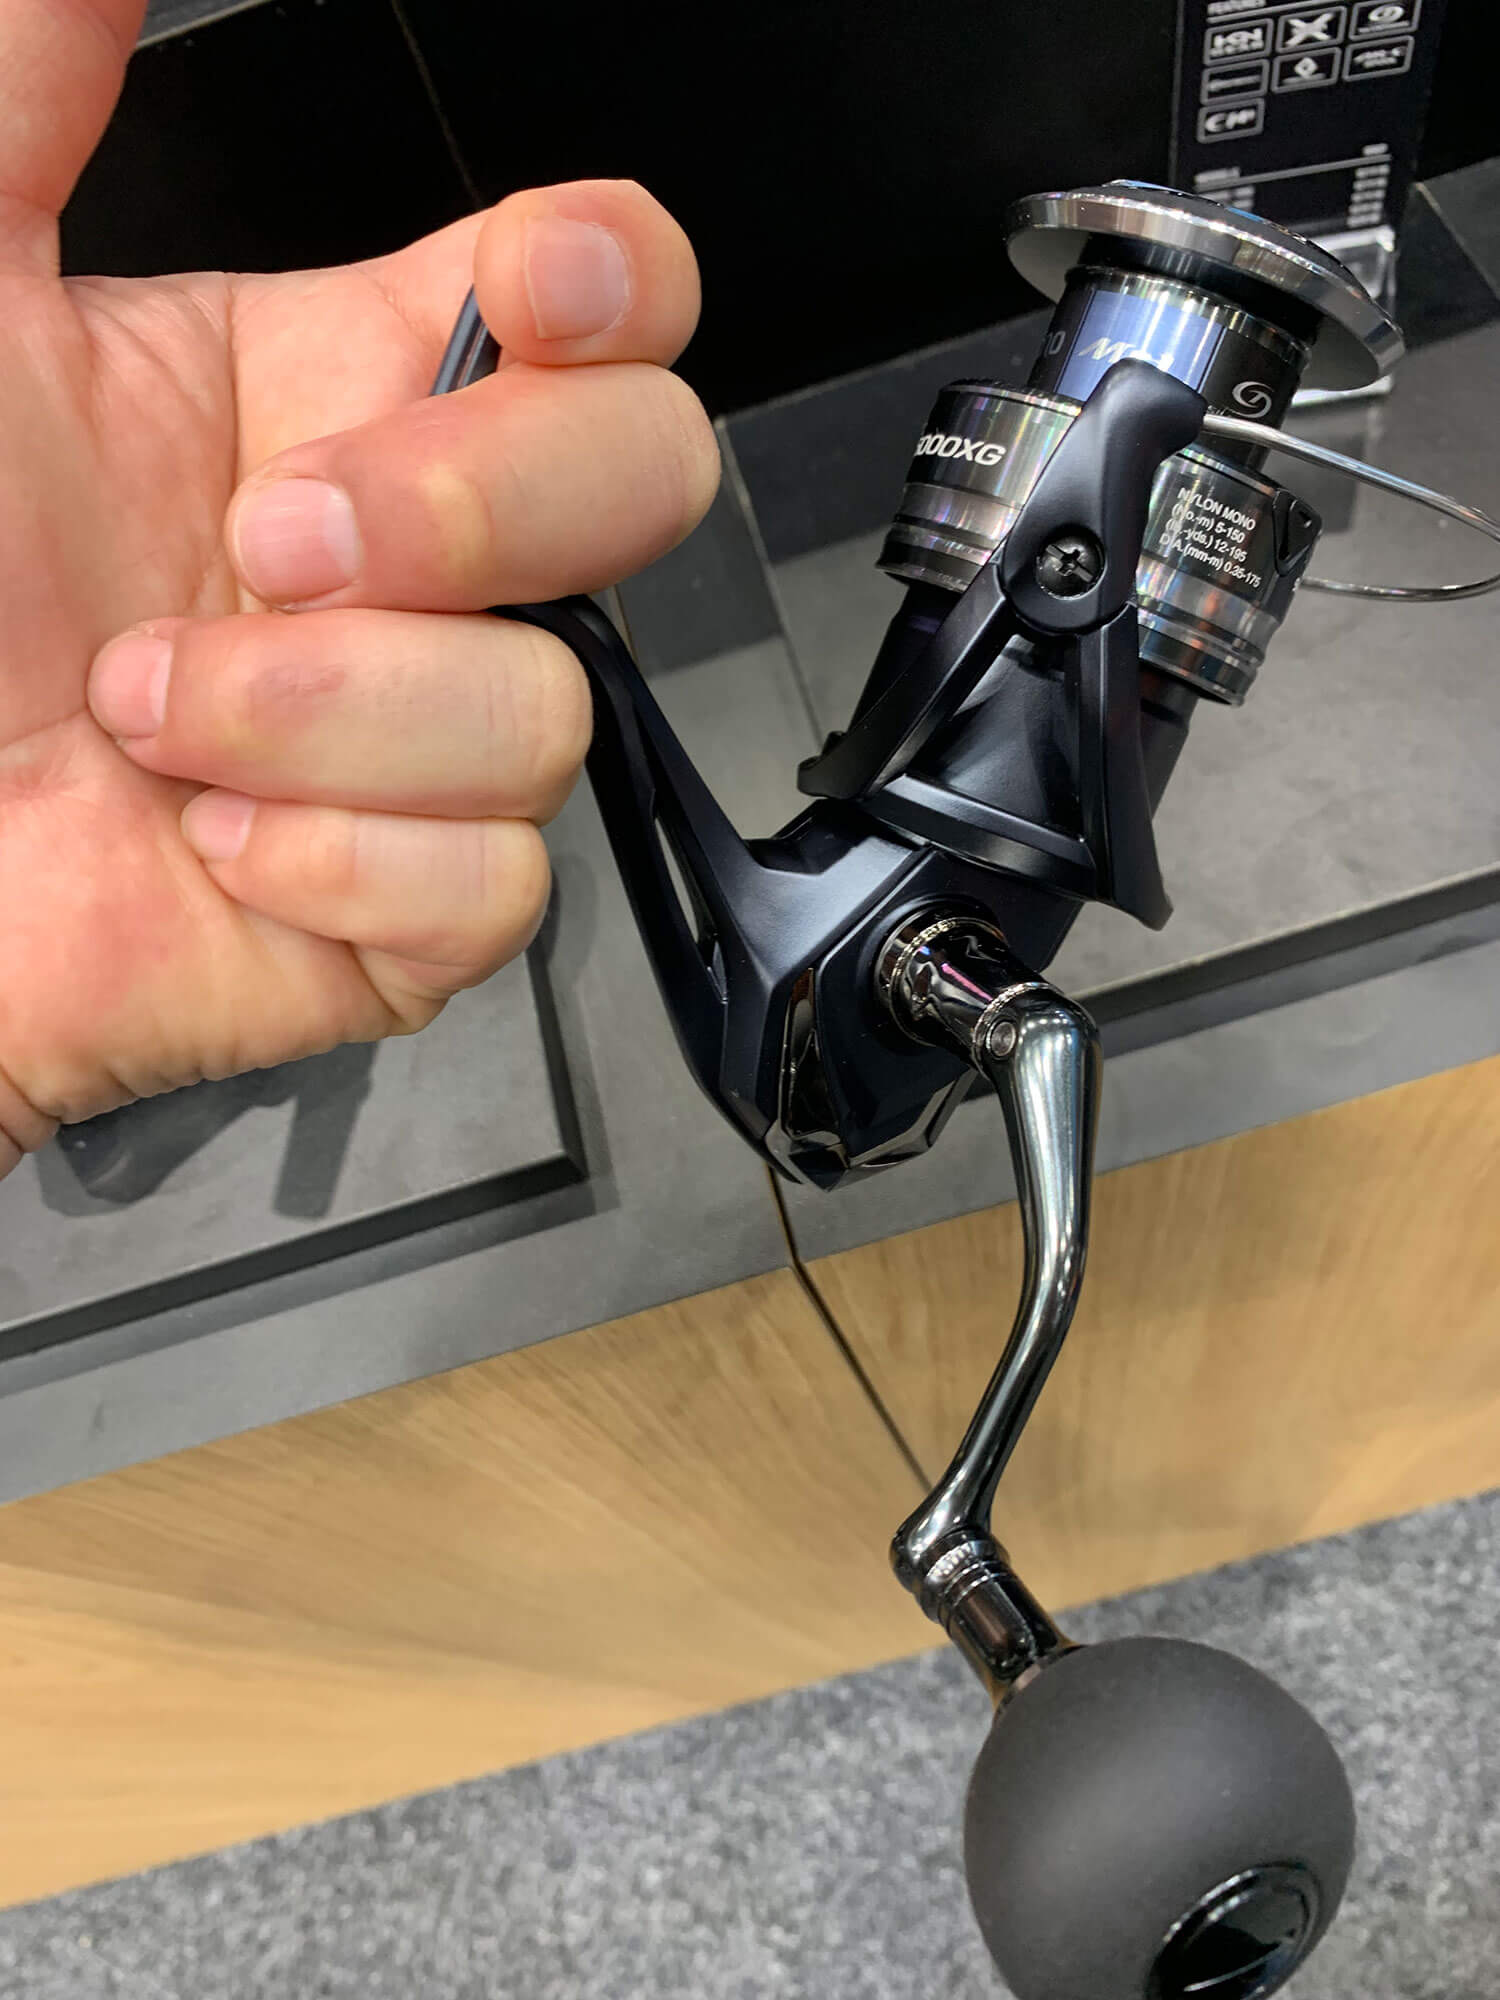 Light but Affordable New Spinning Reel 22 Milavel - 2022 Autumn / Winter  New Products from SHIMANO - Japan Fishing and Tackle News